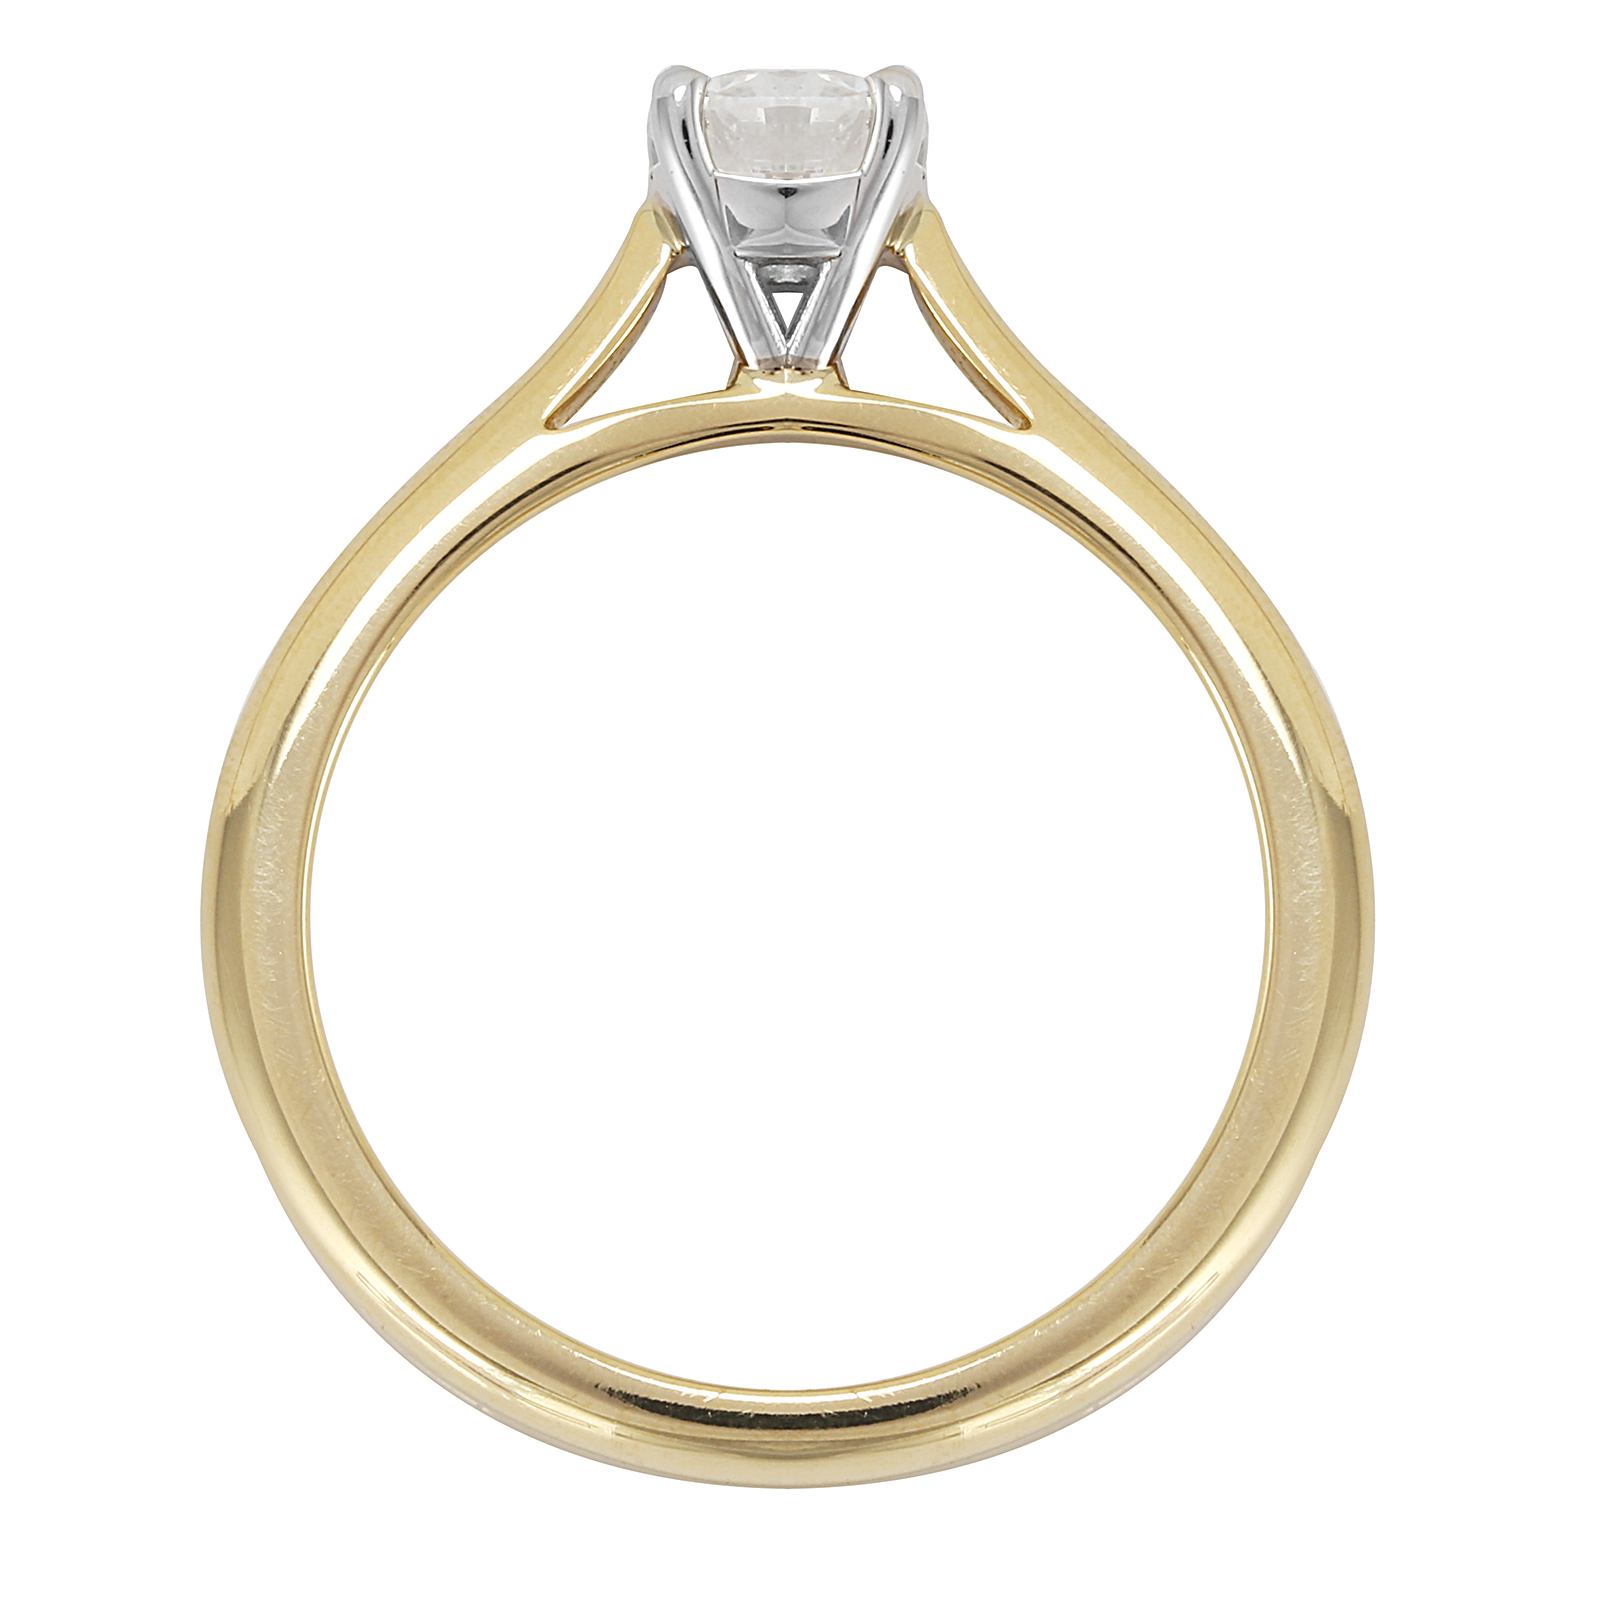 Silhouette 18ct Yellow Gold 0.25ct Diamond Engagement Ring | Rings ...